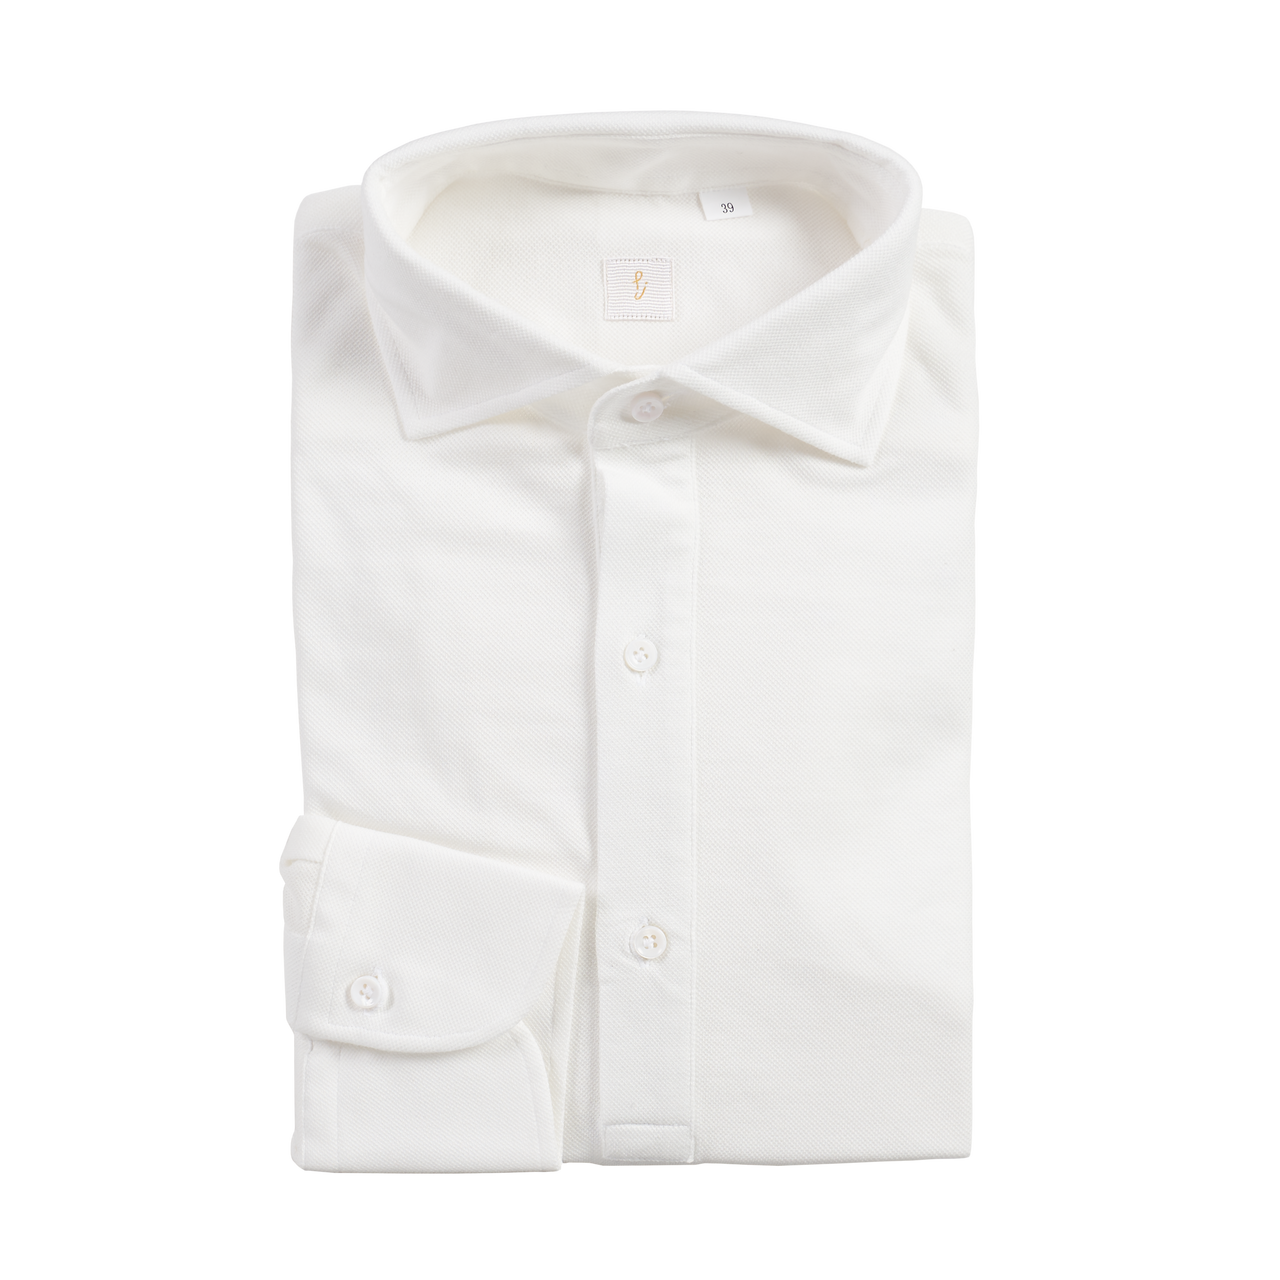 P. Johnson Popover in White Cotton Pique with Cutaway Collar